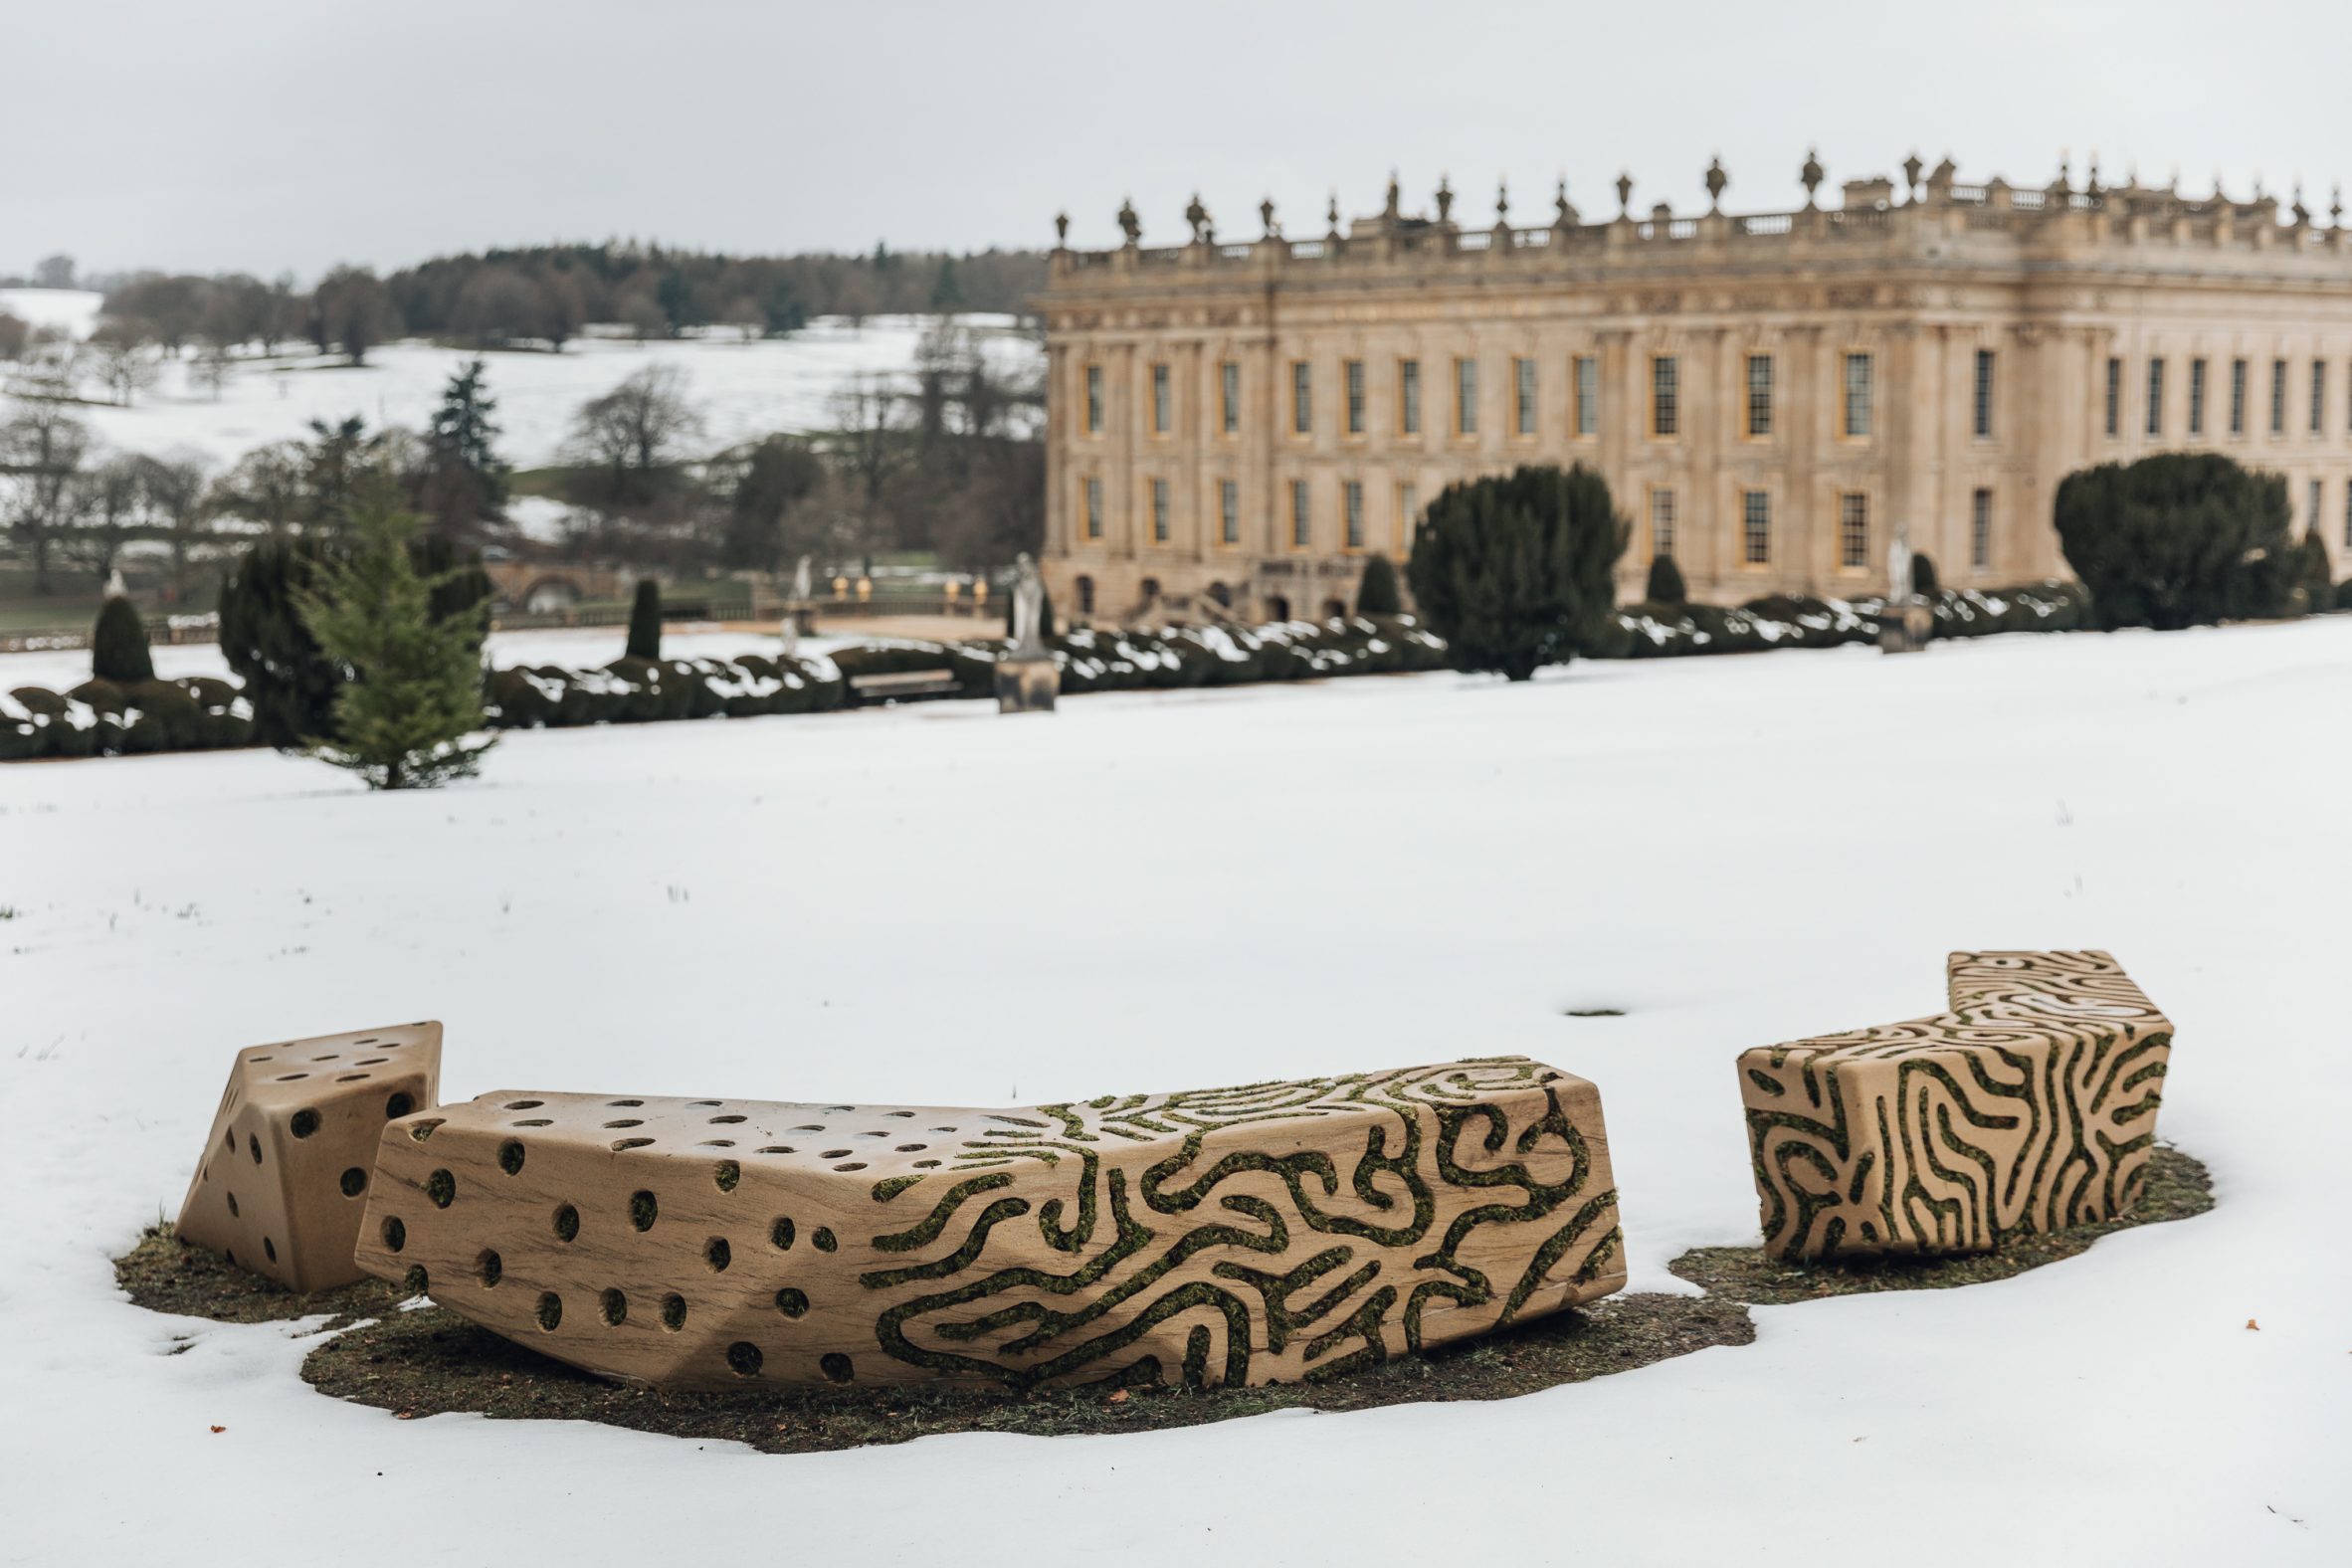 Joris Laarman's benches situated in the gardens of Chatsworth House